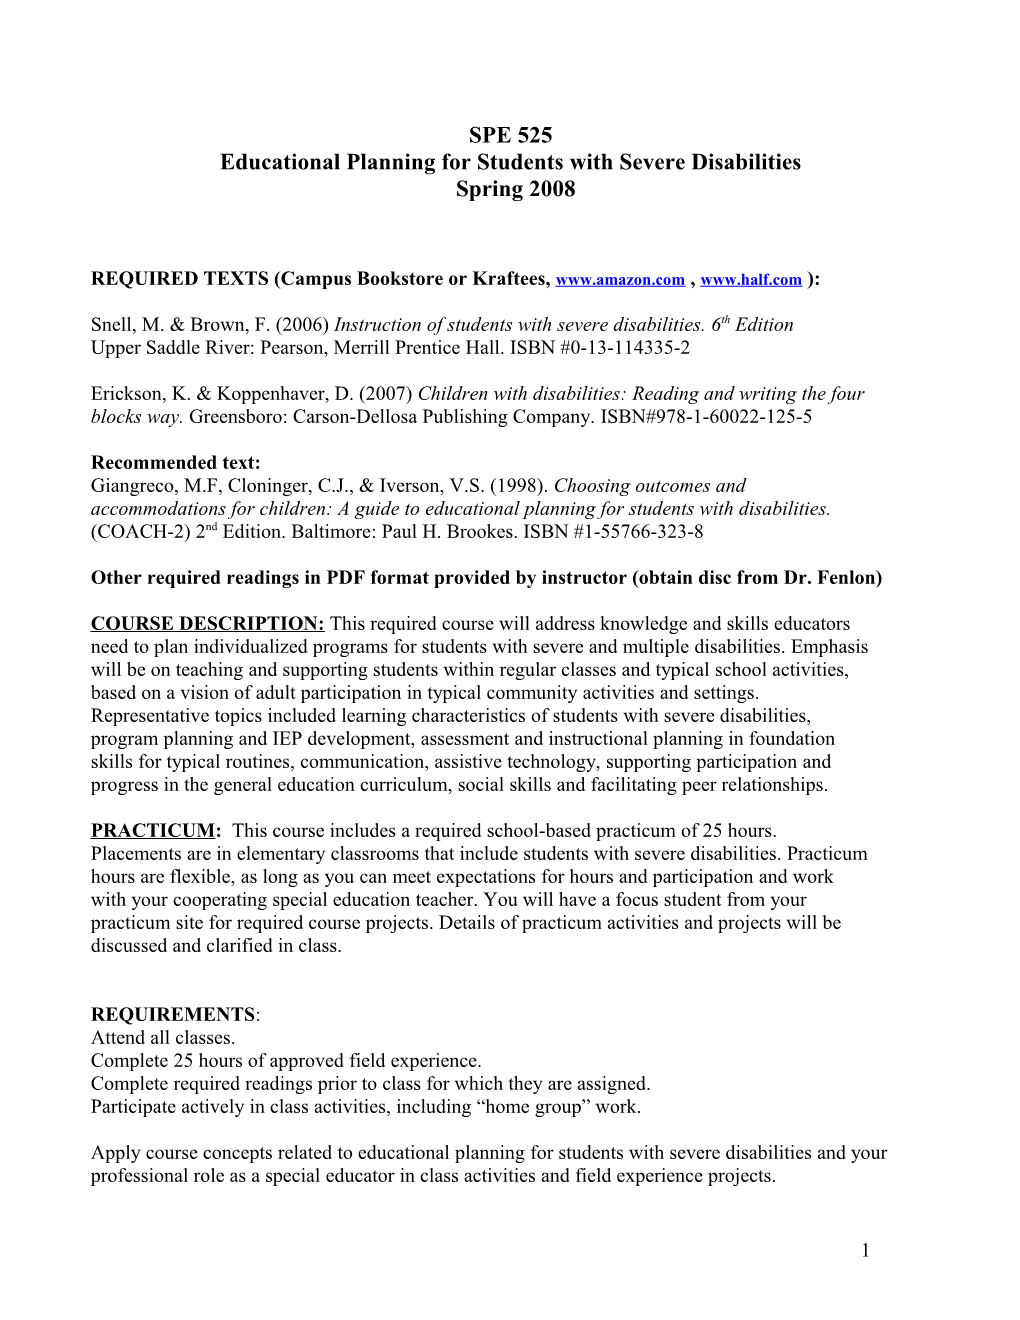 Educational Planning for Students with Severe Disabilities